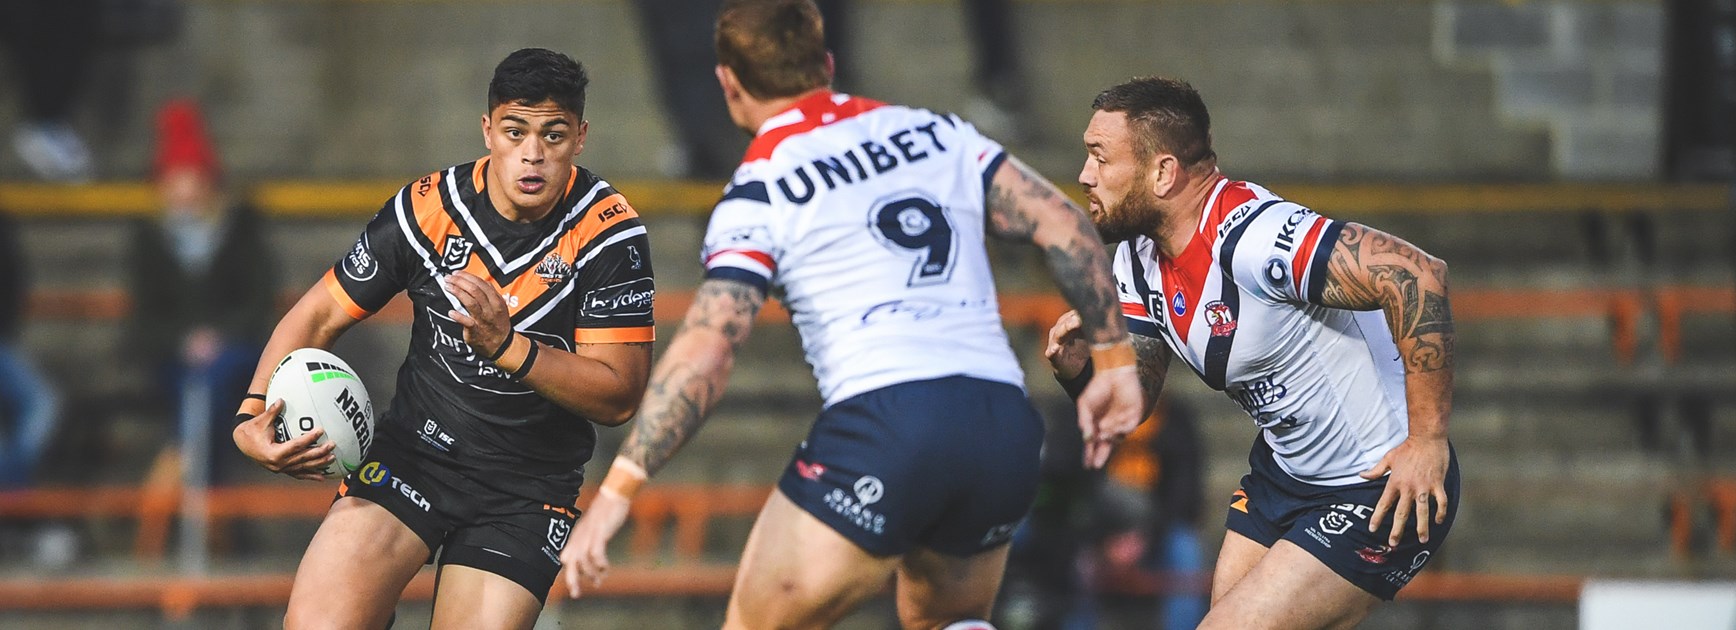 Wests Tigers to face Roosters in further 2021 preparations